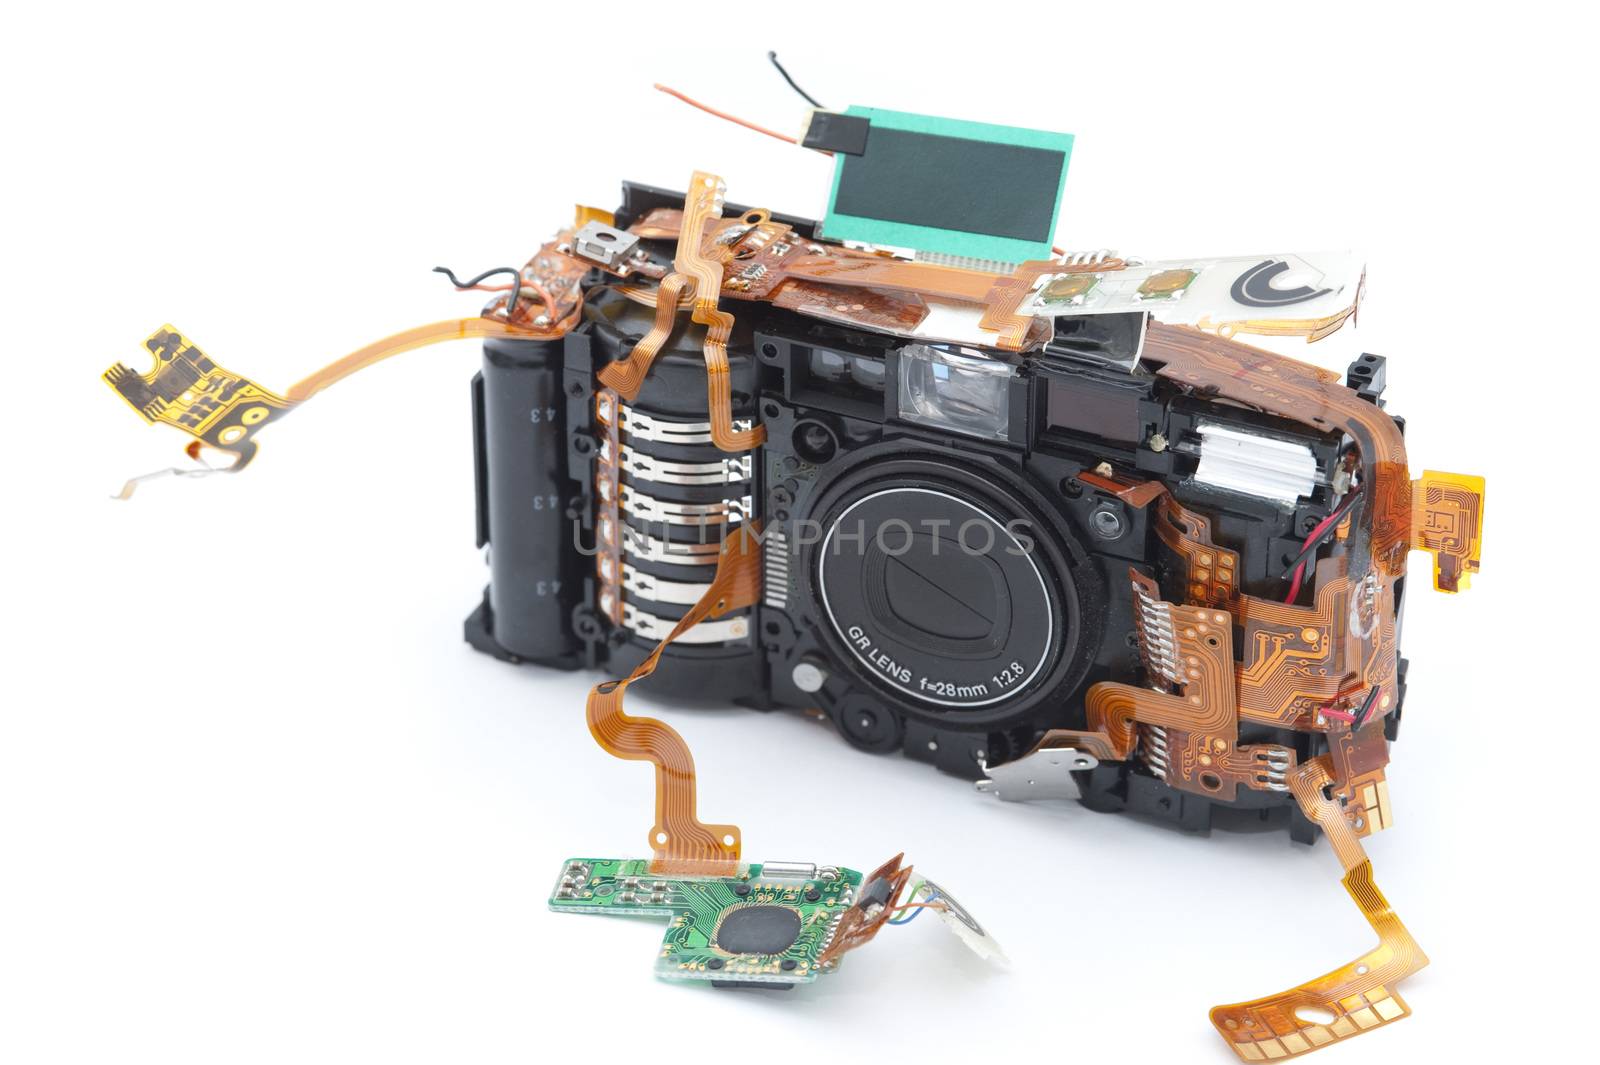 Disassembled digital camera with exposed copper ribbons attached to green soldered micro board